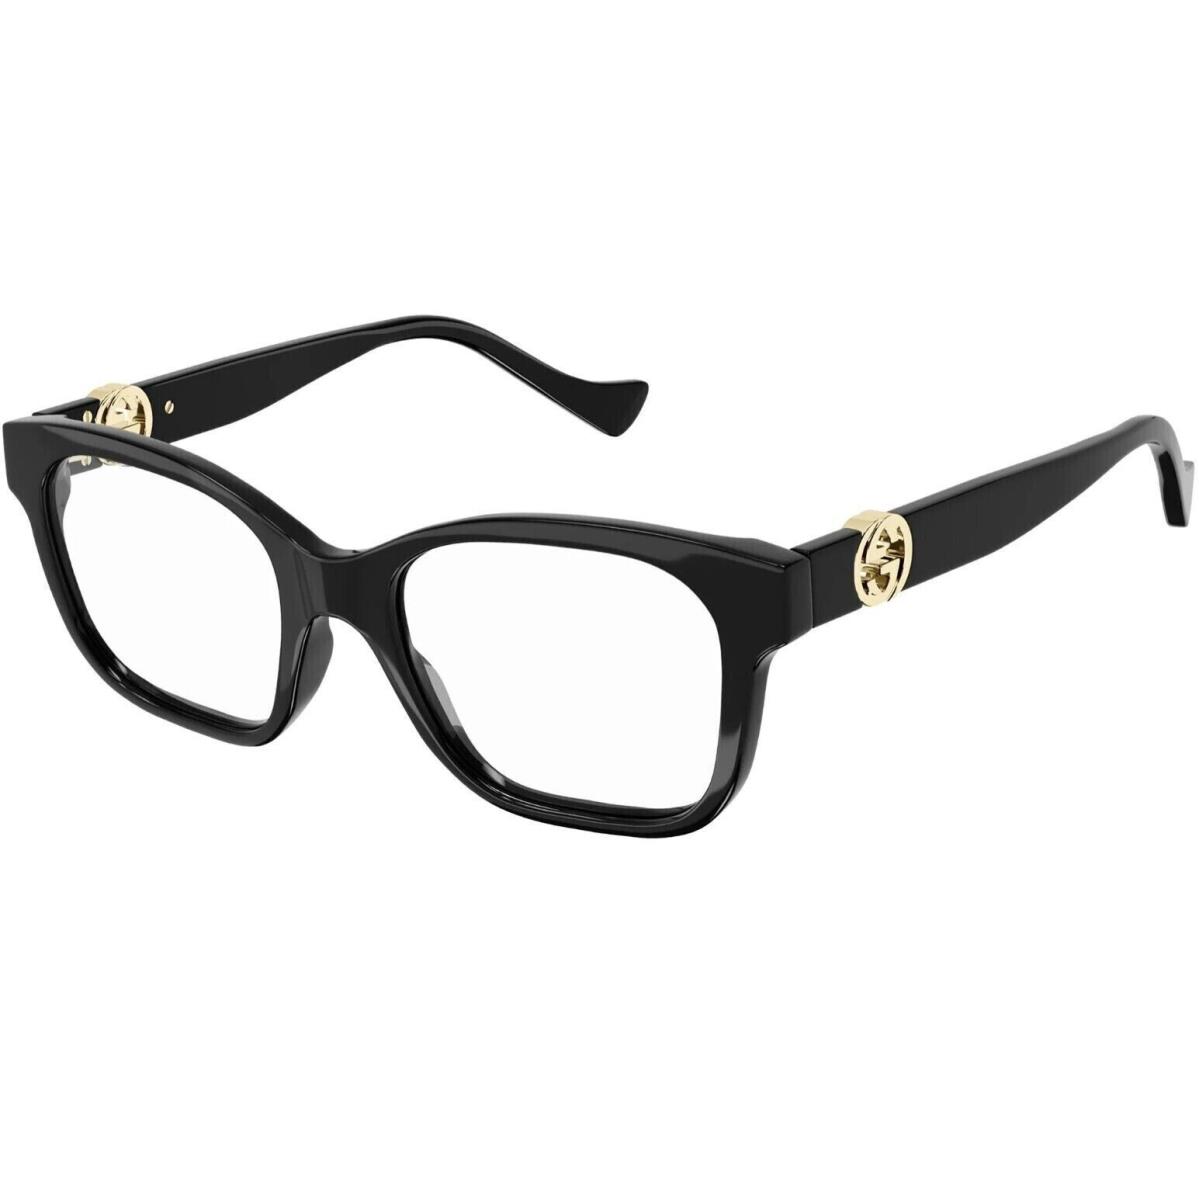 Gucci GG1025O 001 Black Gold Eyeglasses 51mm with Gucci Case Optical Frame